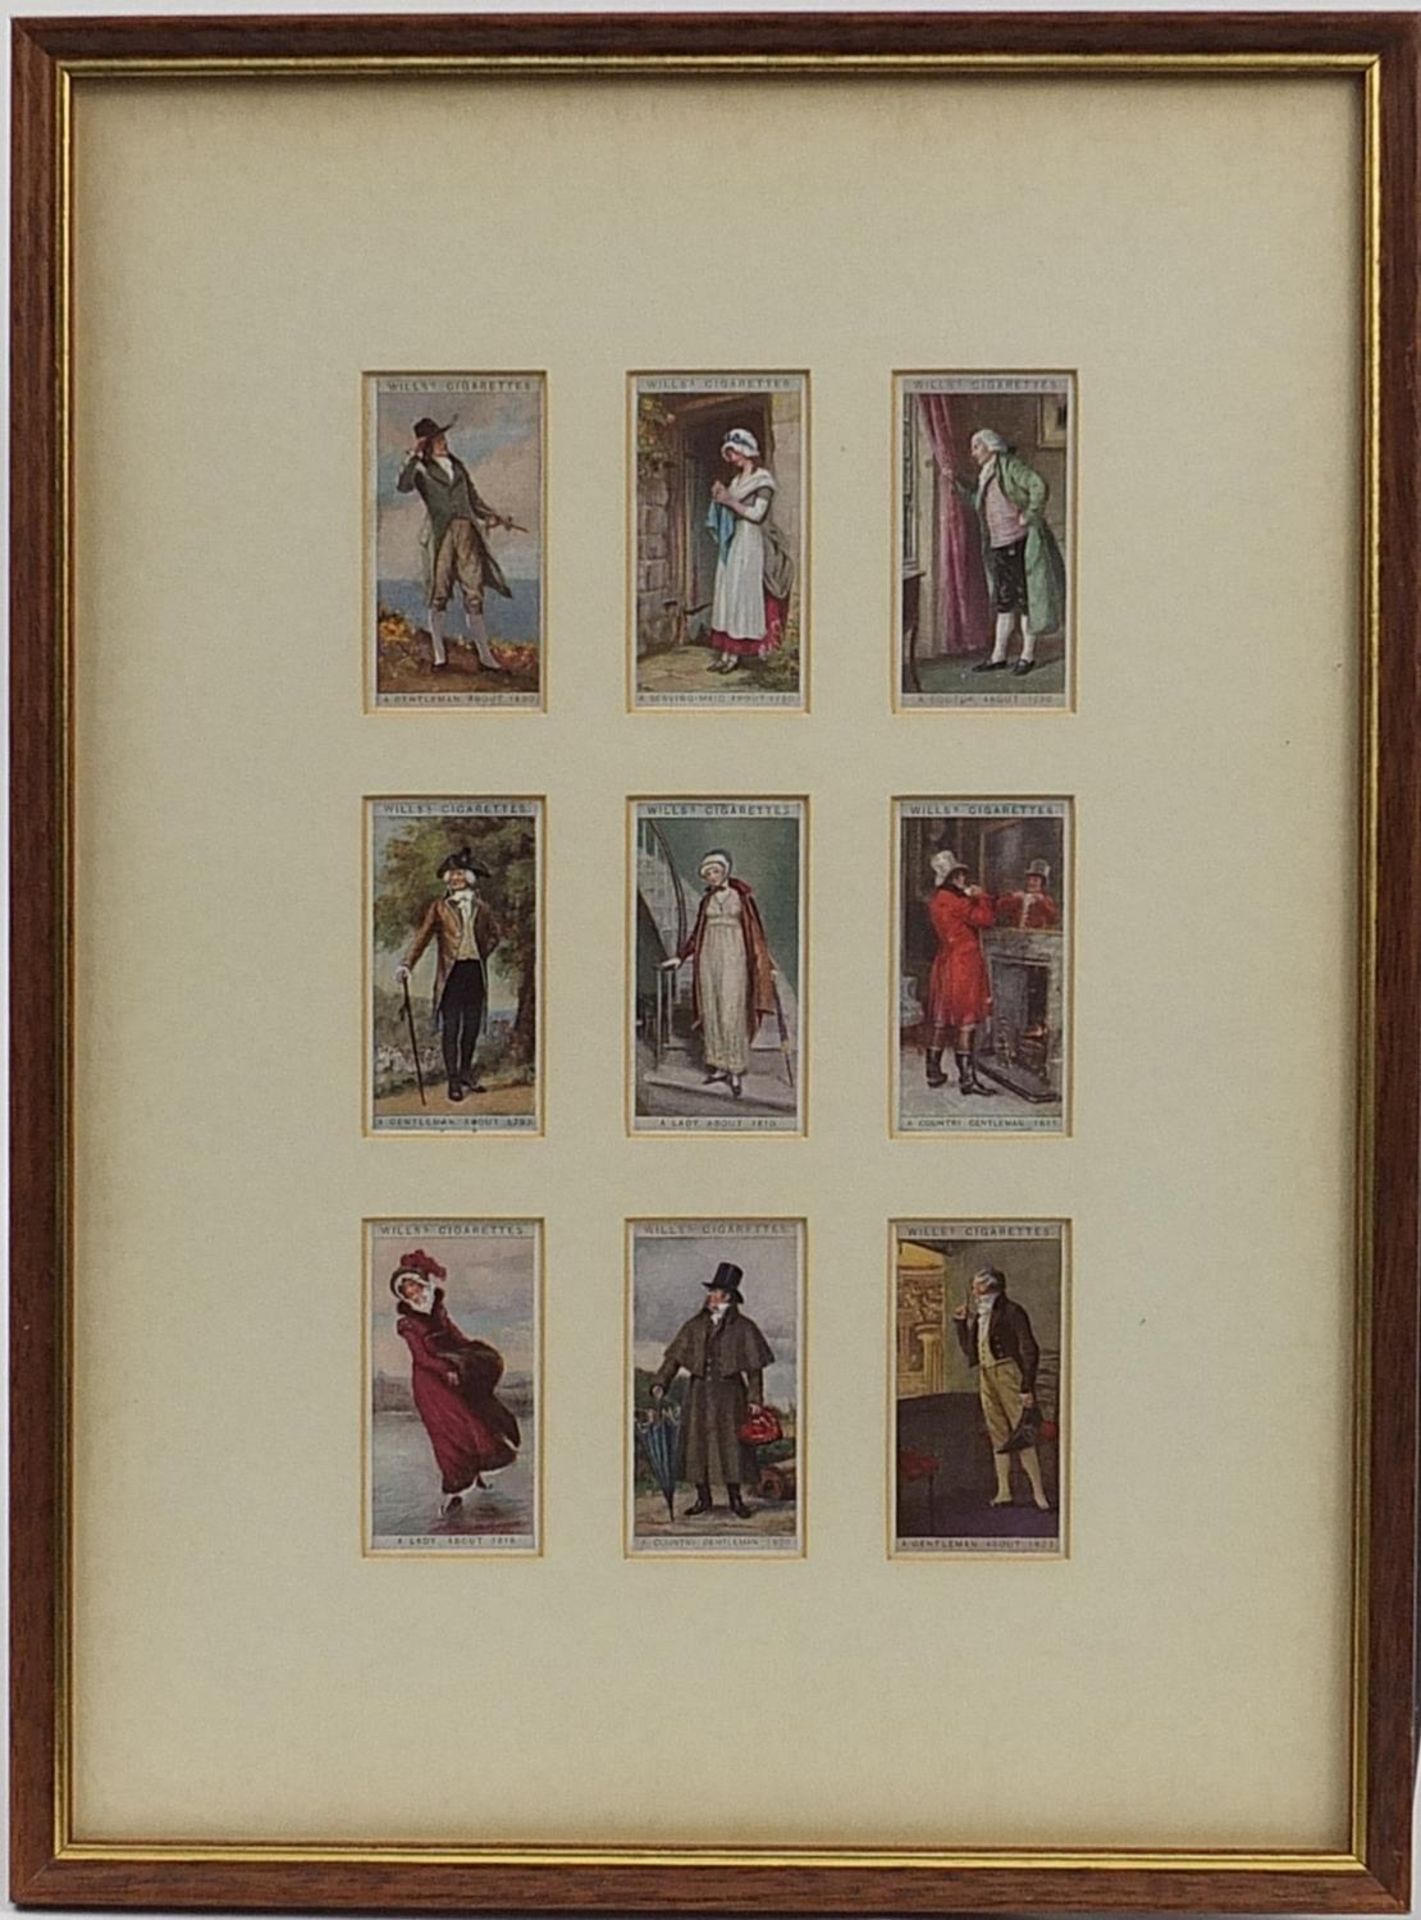 Framed Wills Cigarette cards -English period costumes housed in back and front glass frames, each